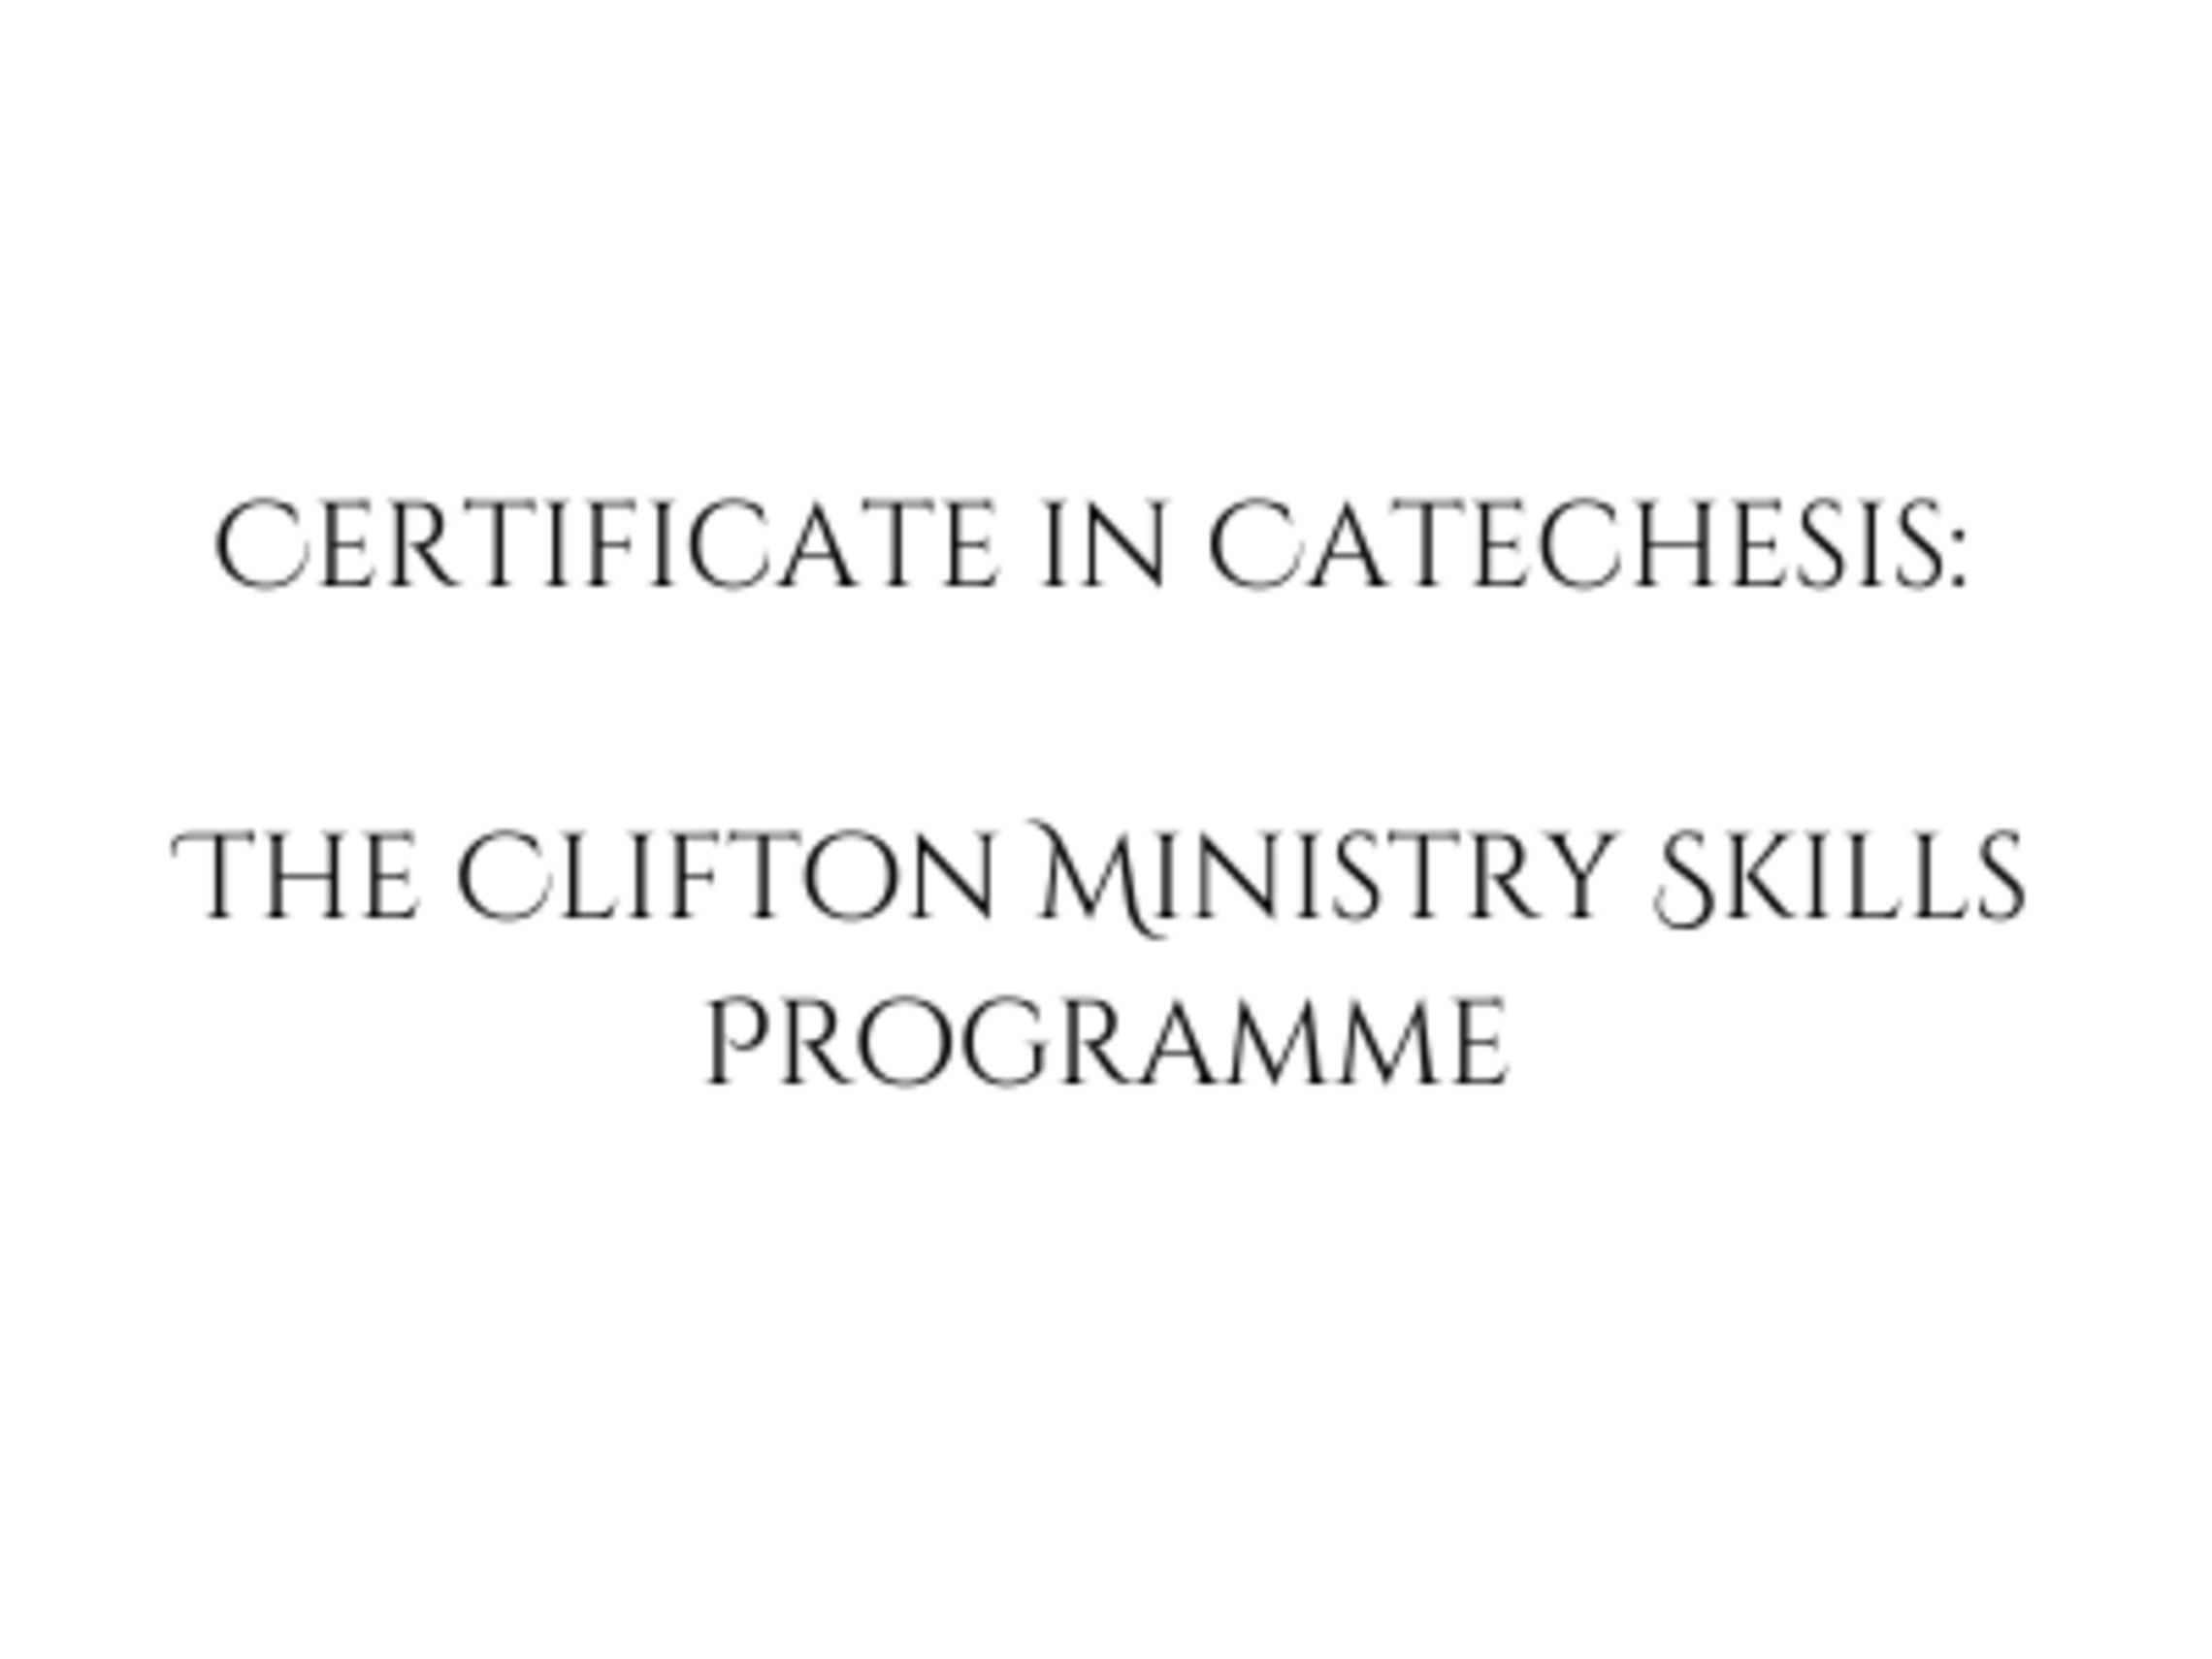 Certificate In Catechesis The Clifton Ministry Skills Programme 400 X 300 Px